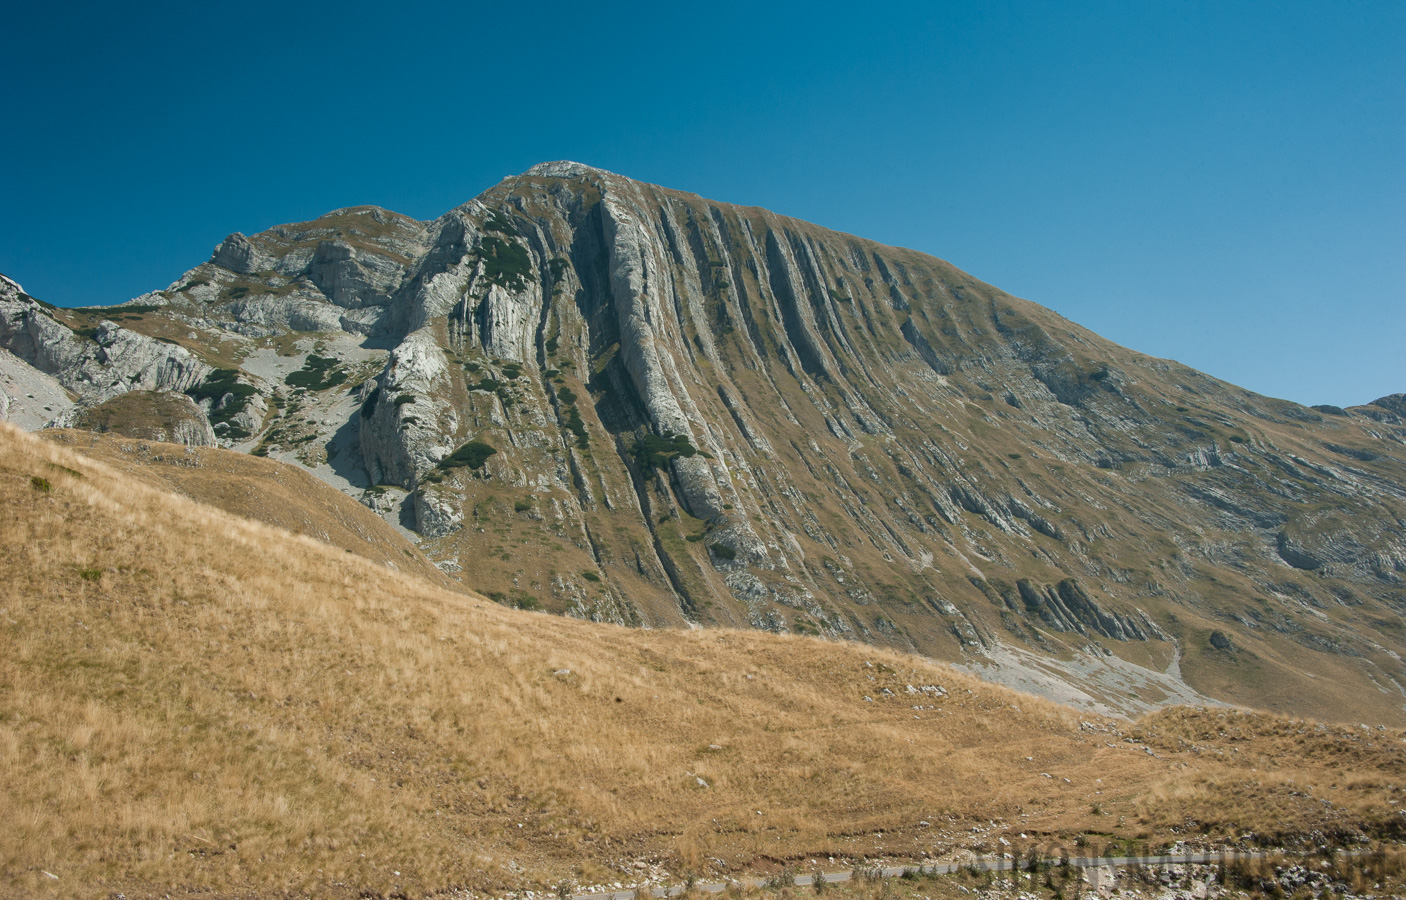 Montenegro - In the region of the Durmitor massif [42 mm, 1/80 sec at f / 20, ISO 400]